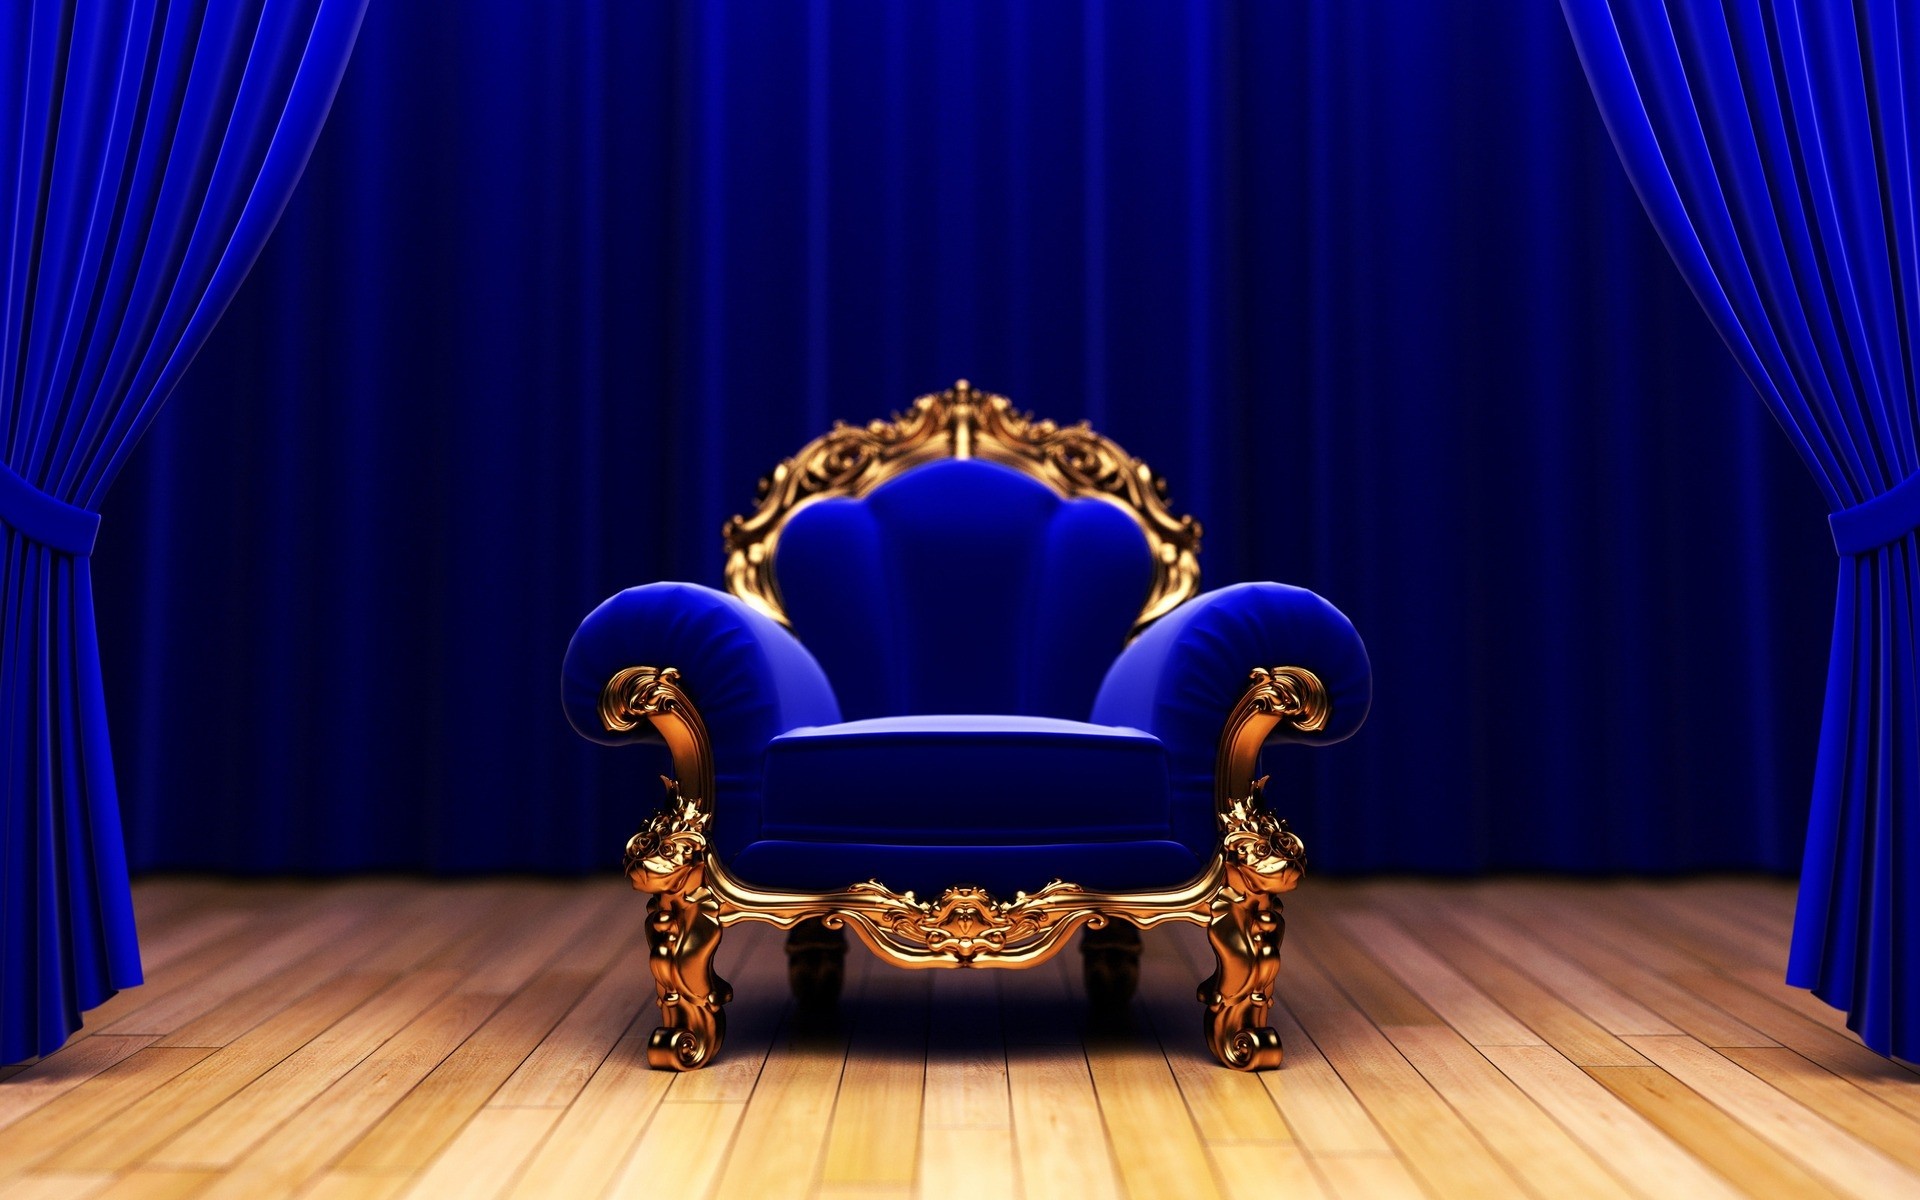 Royal Background Download Free Cool High Resolution